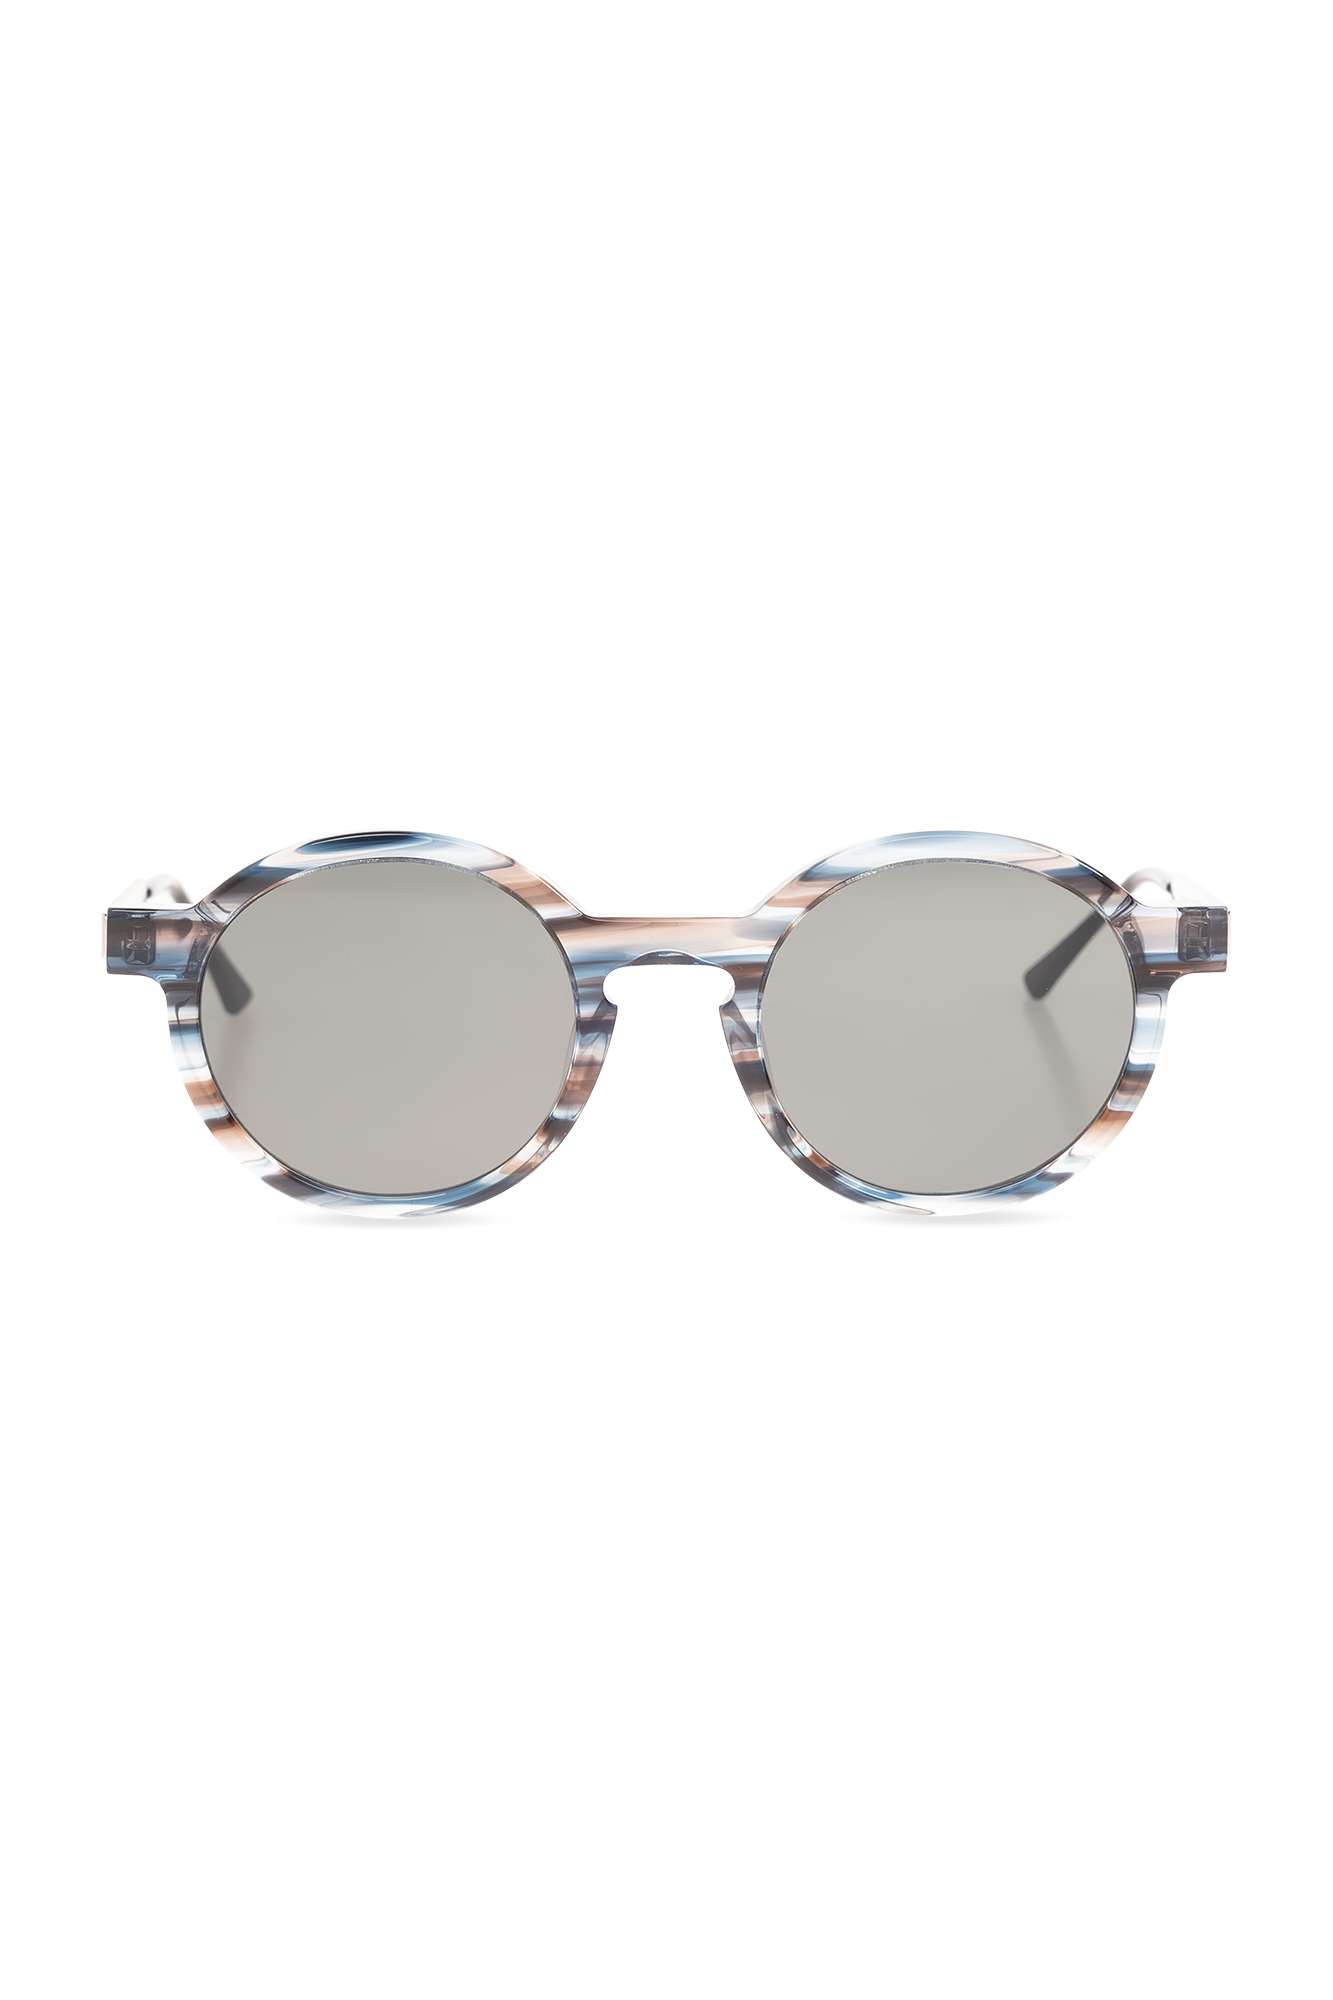 Thierry Lasry ‘Sobriety’ sunglasses